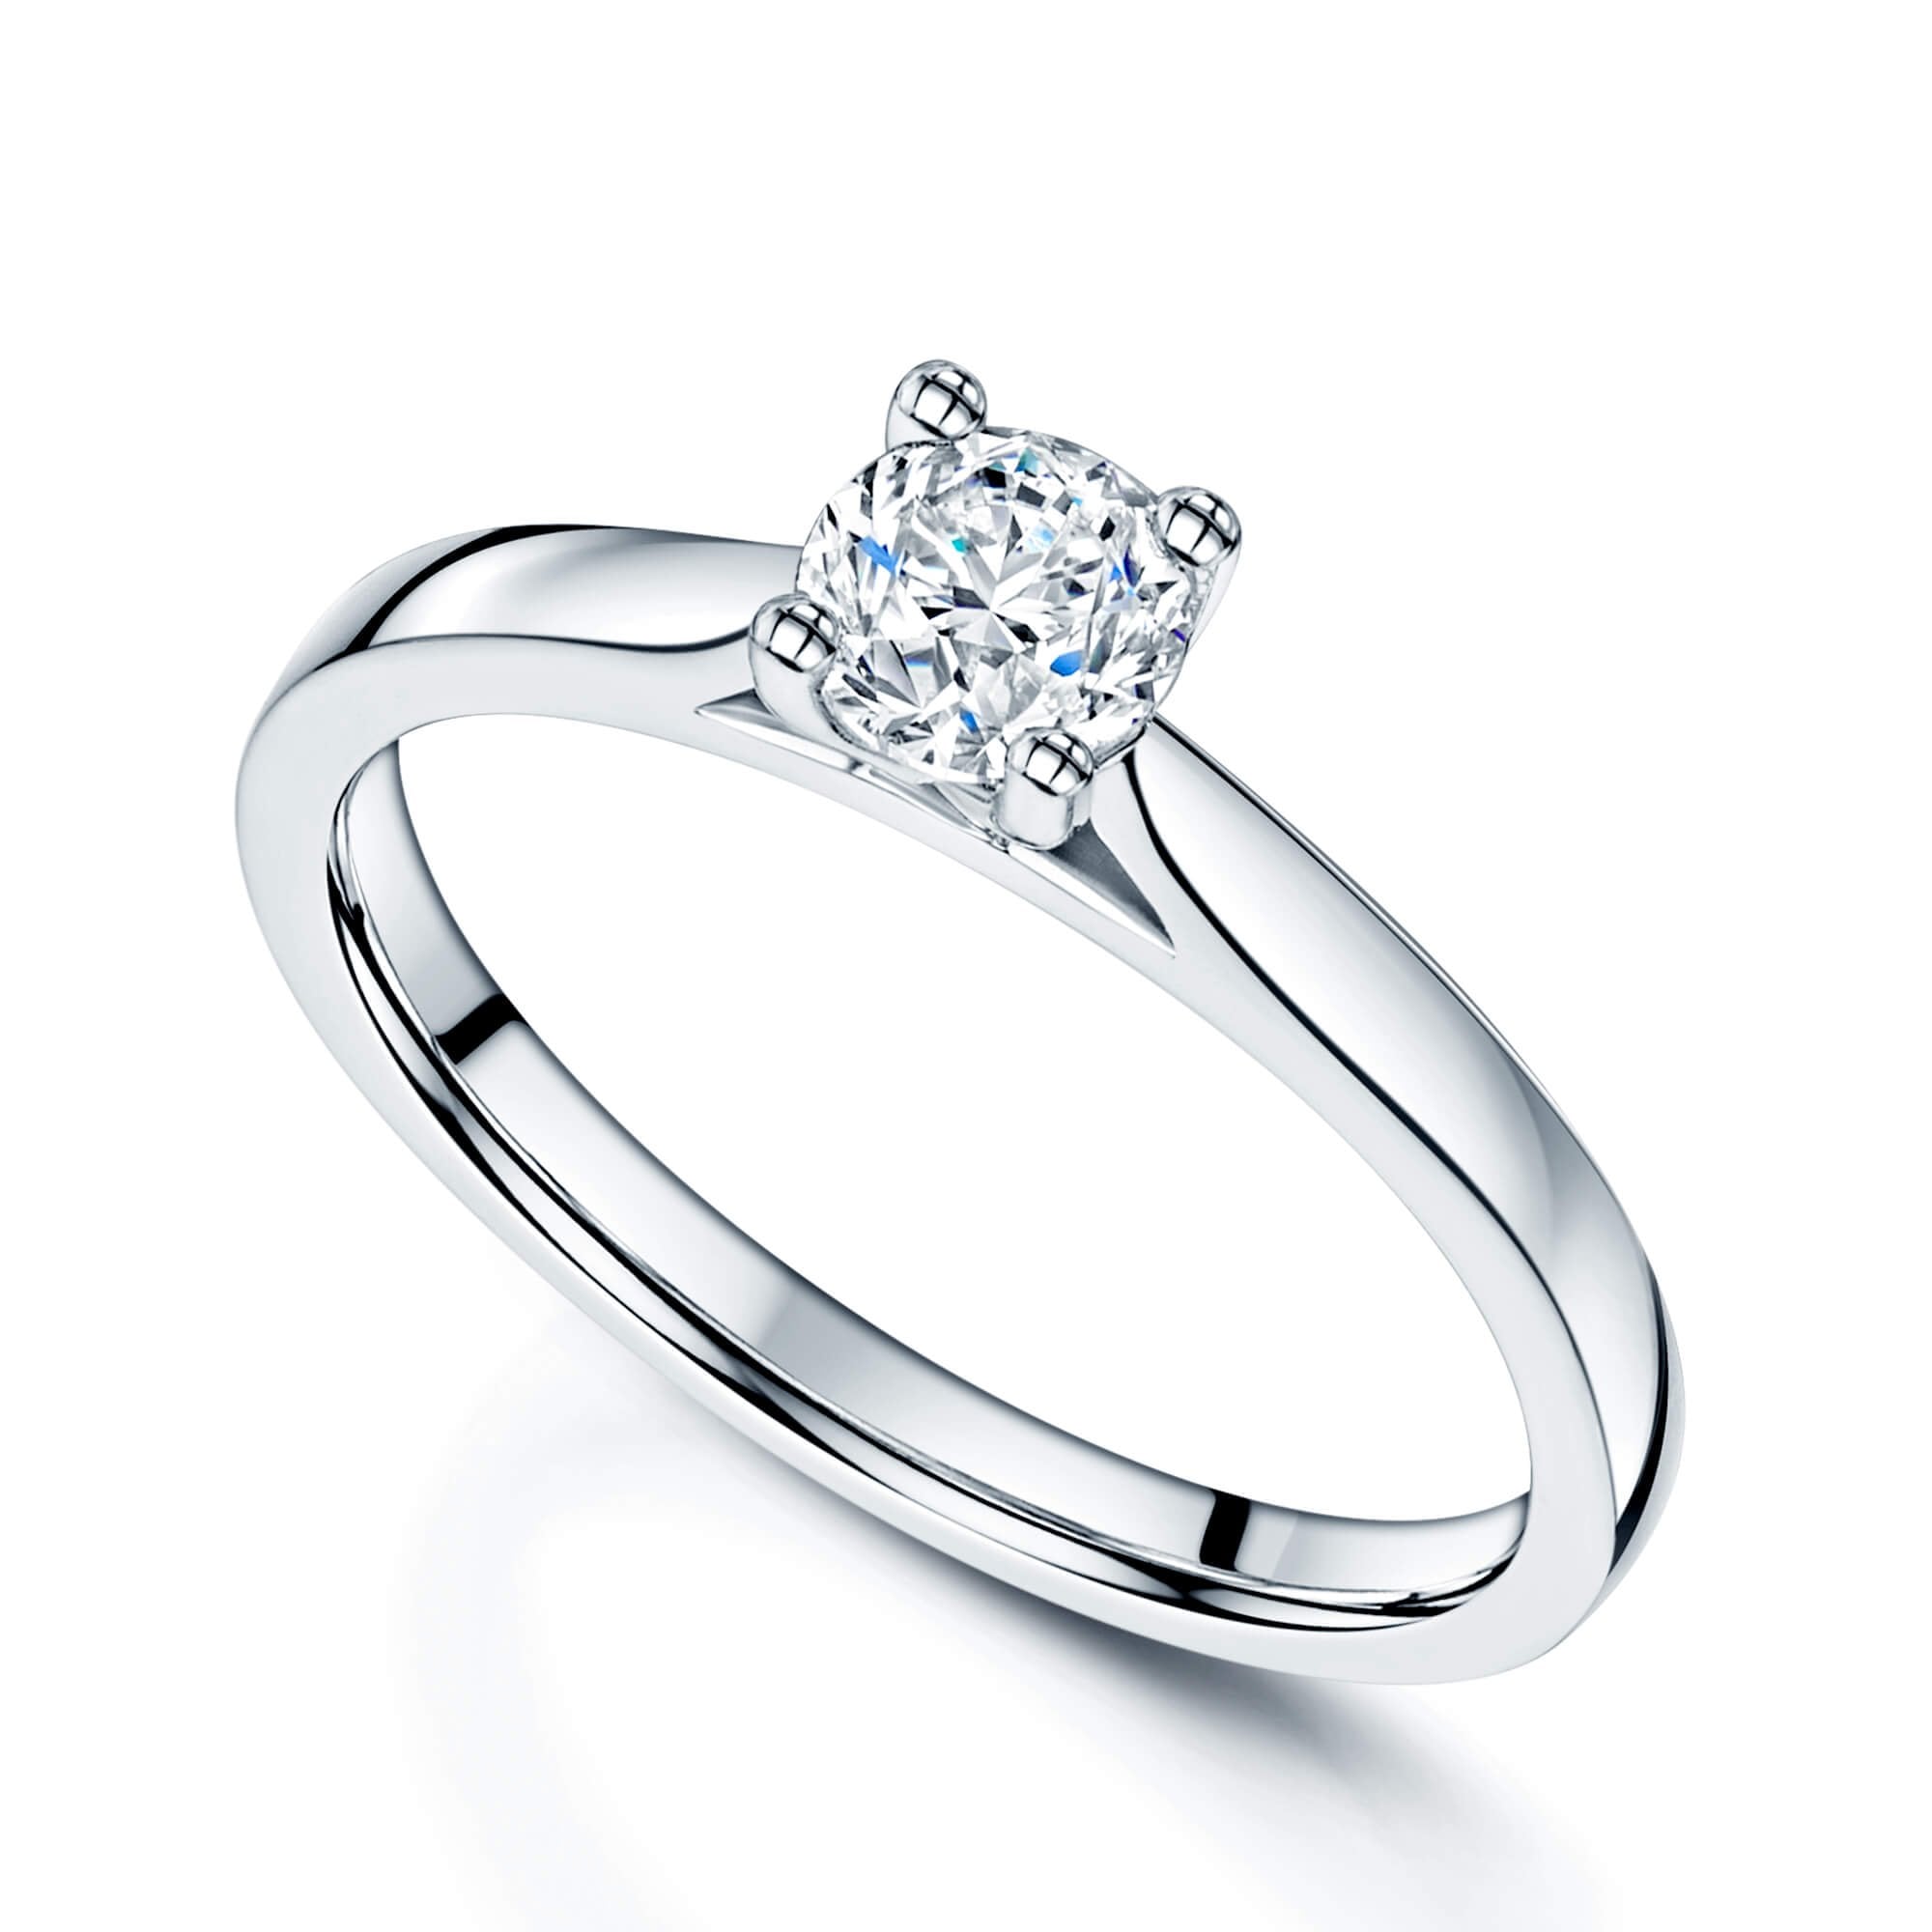 Simply Solitaire Collection Platinum Set Diamond Solitaire Engagement Ring GIA Certified 0.50 Carat